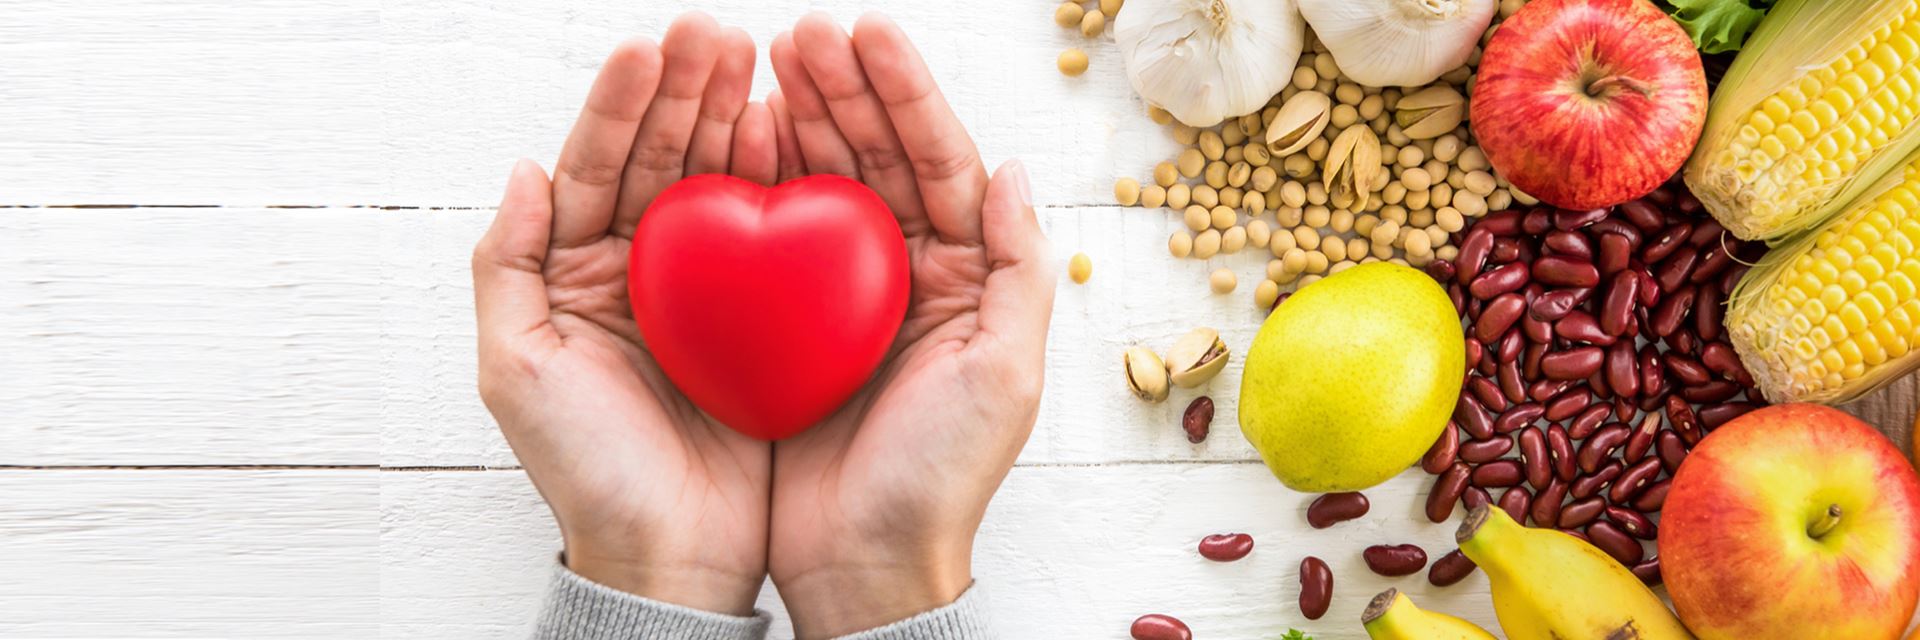 Article, Lowering Cholesterol Naturally